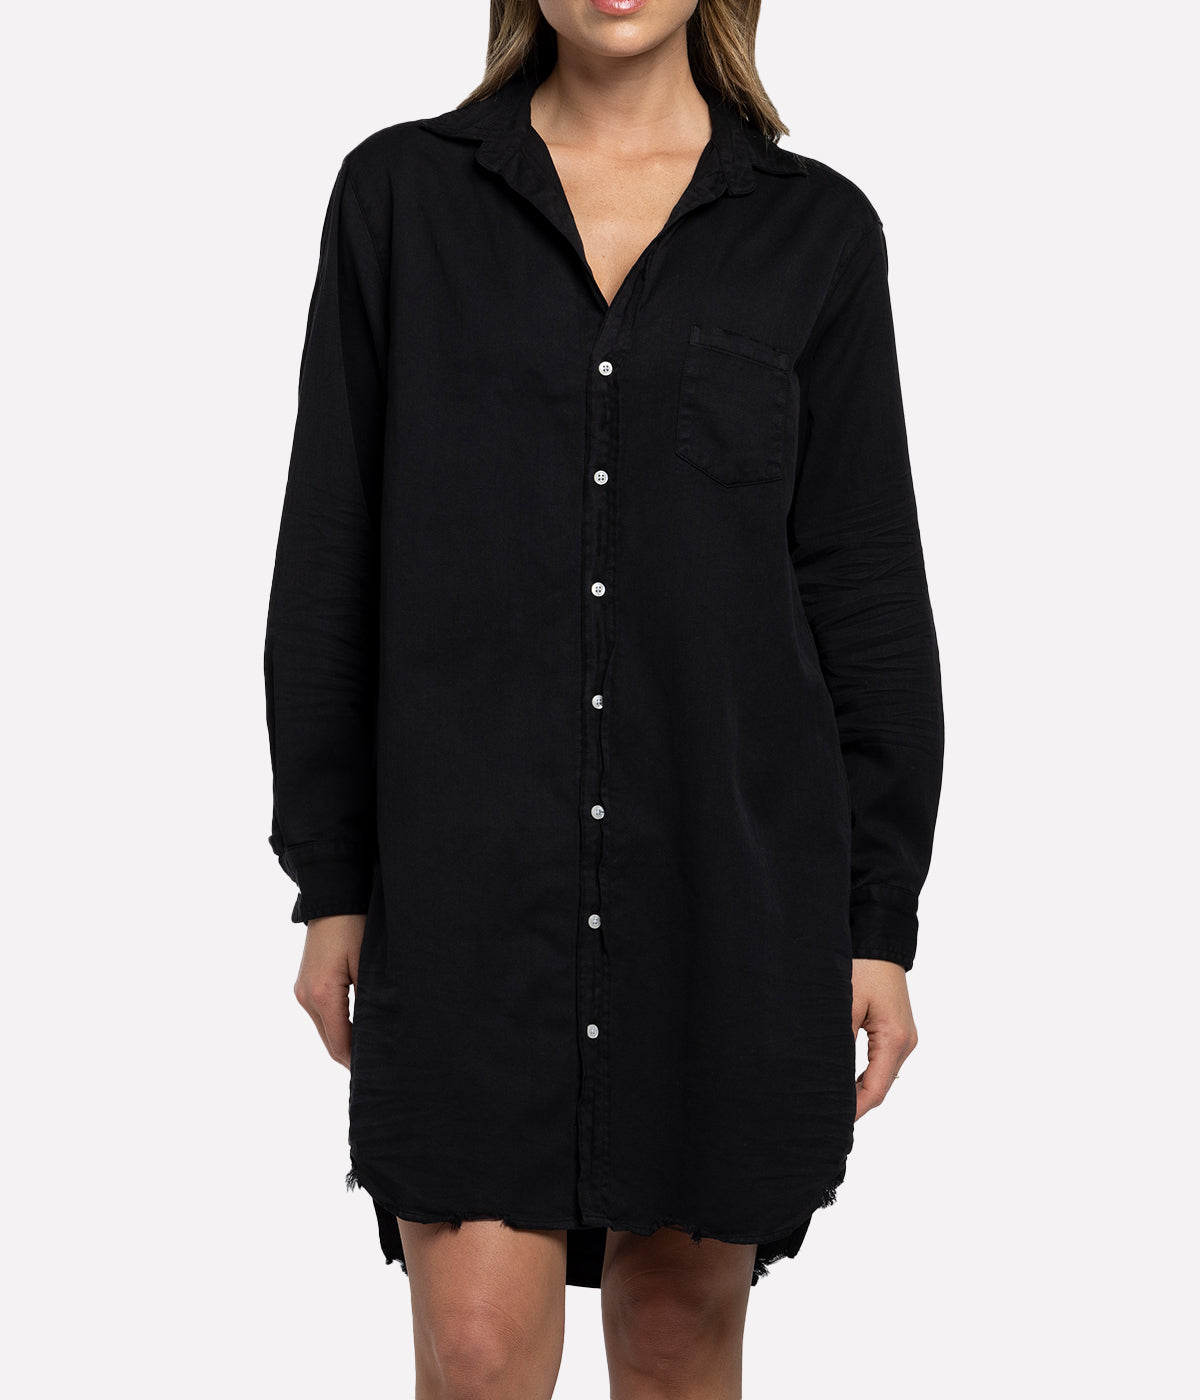 Mary Woven Denim Button Up Dress in Blackout